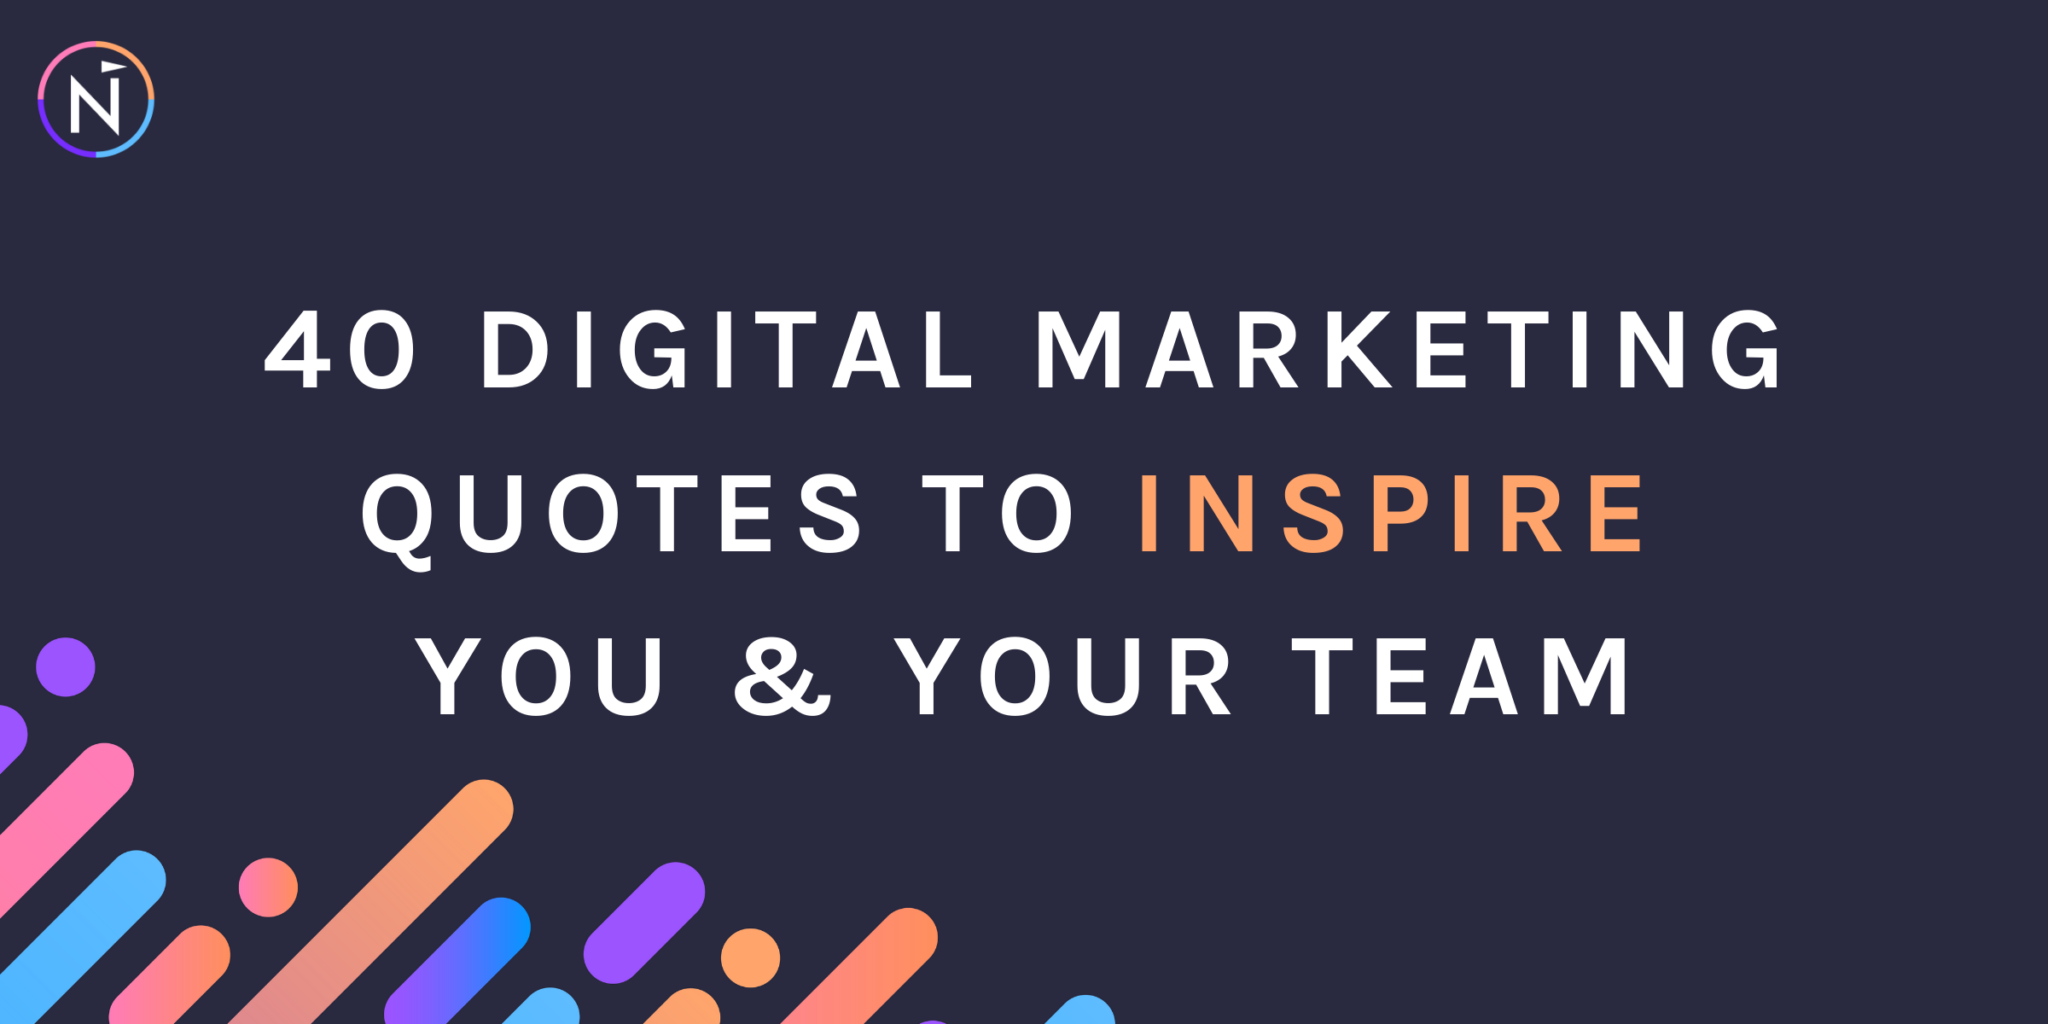 40 Digital Marketing Quotes to Inspire You & Your Team NetResults